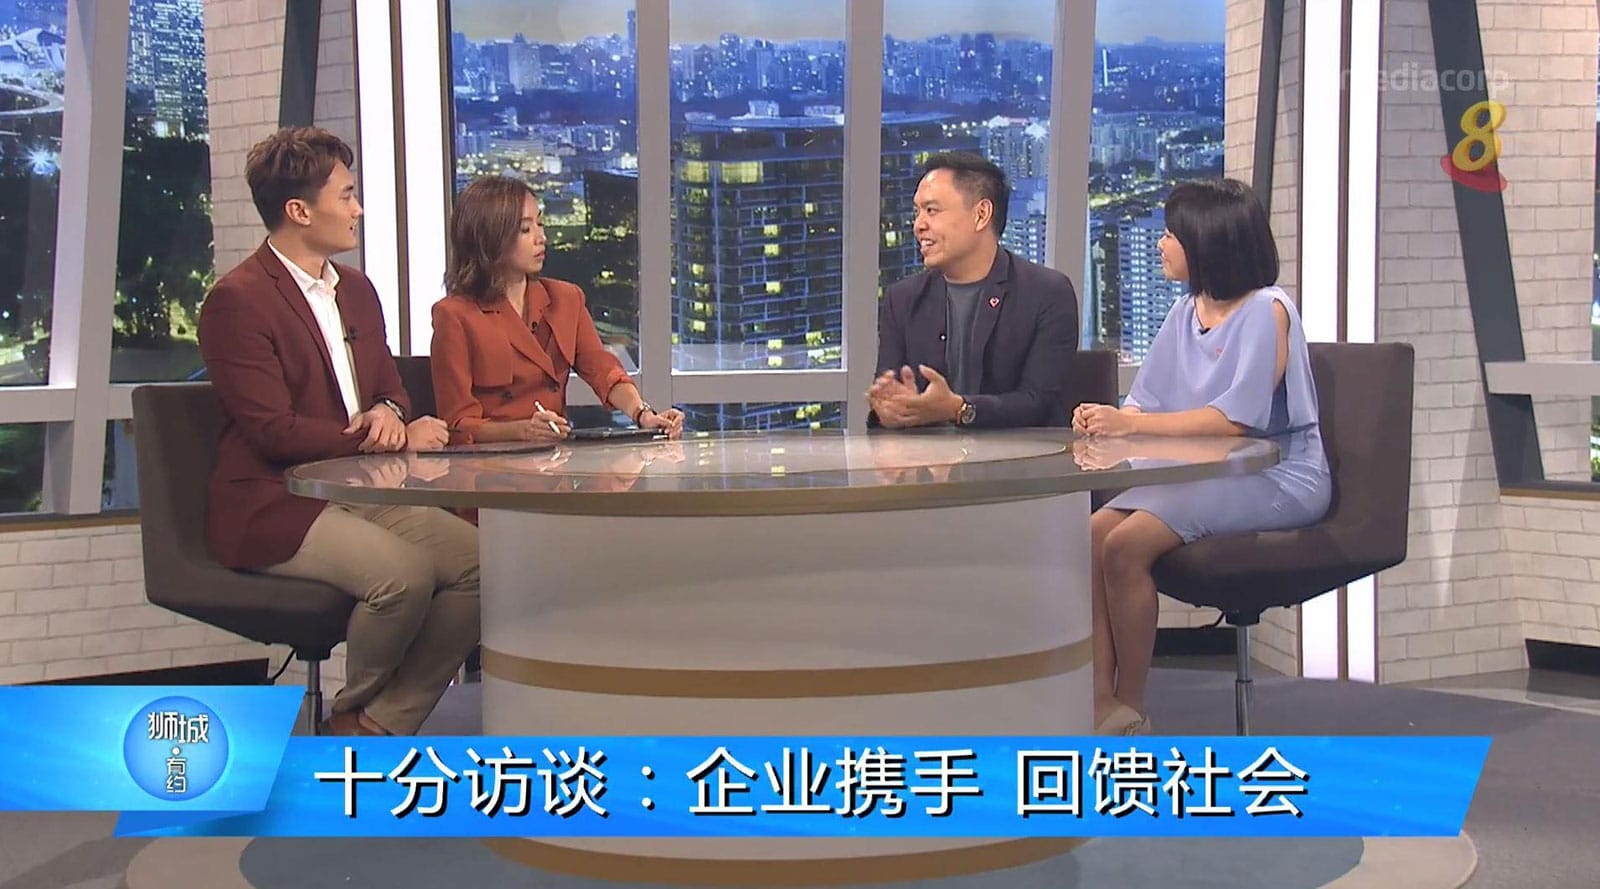 screengrab of chinese news report four people discussing